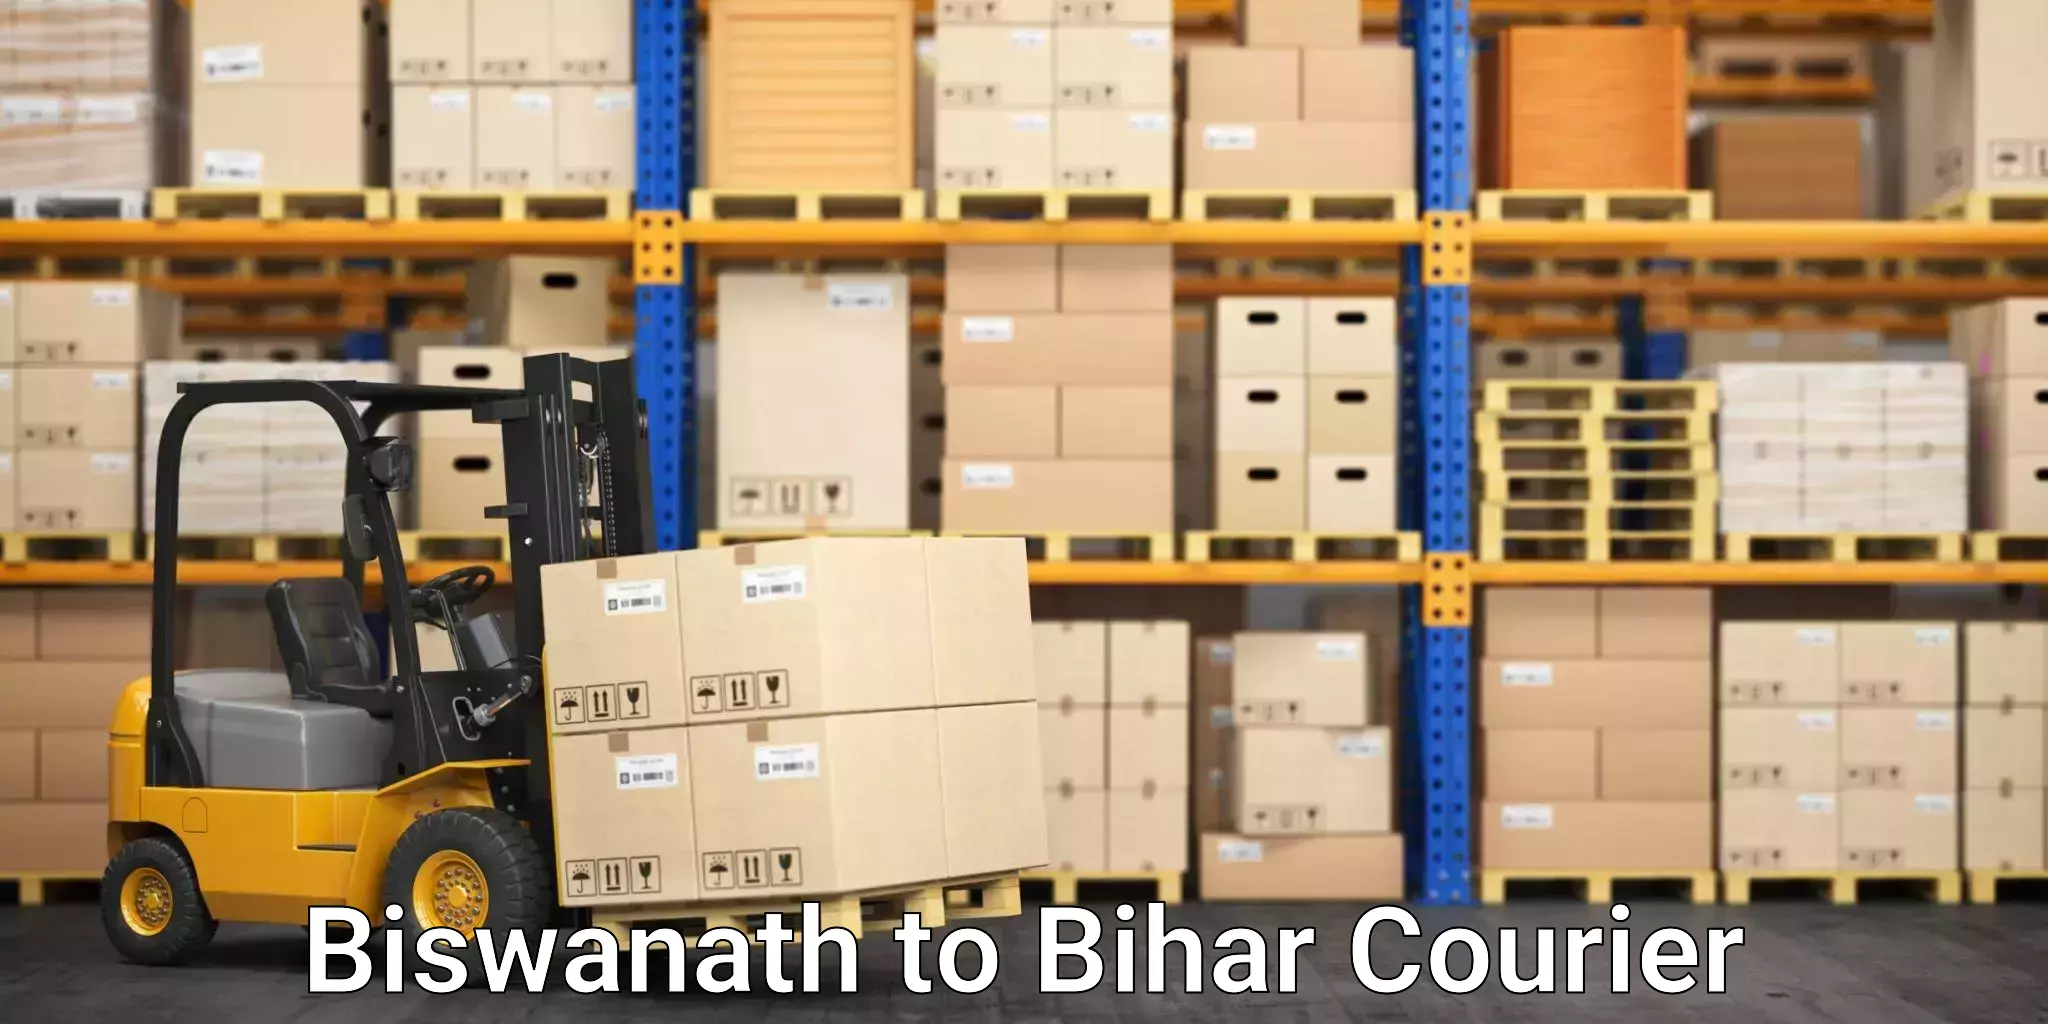 Reliable shipping partners Biswanath to Bihar